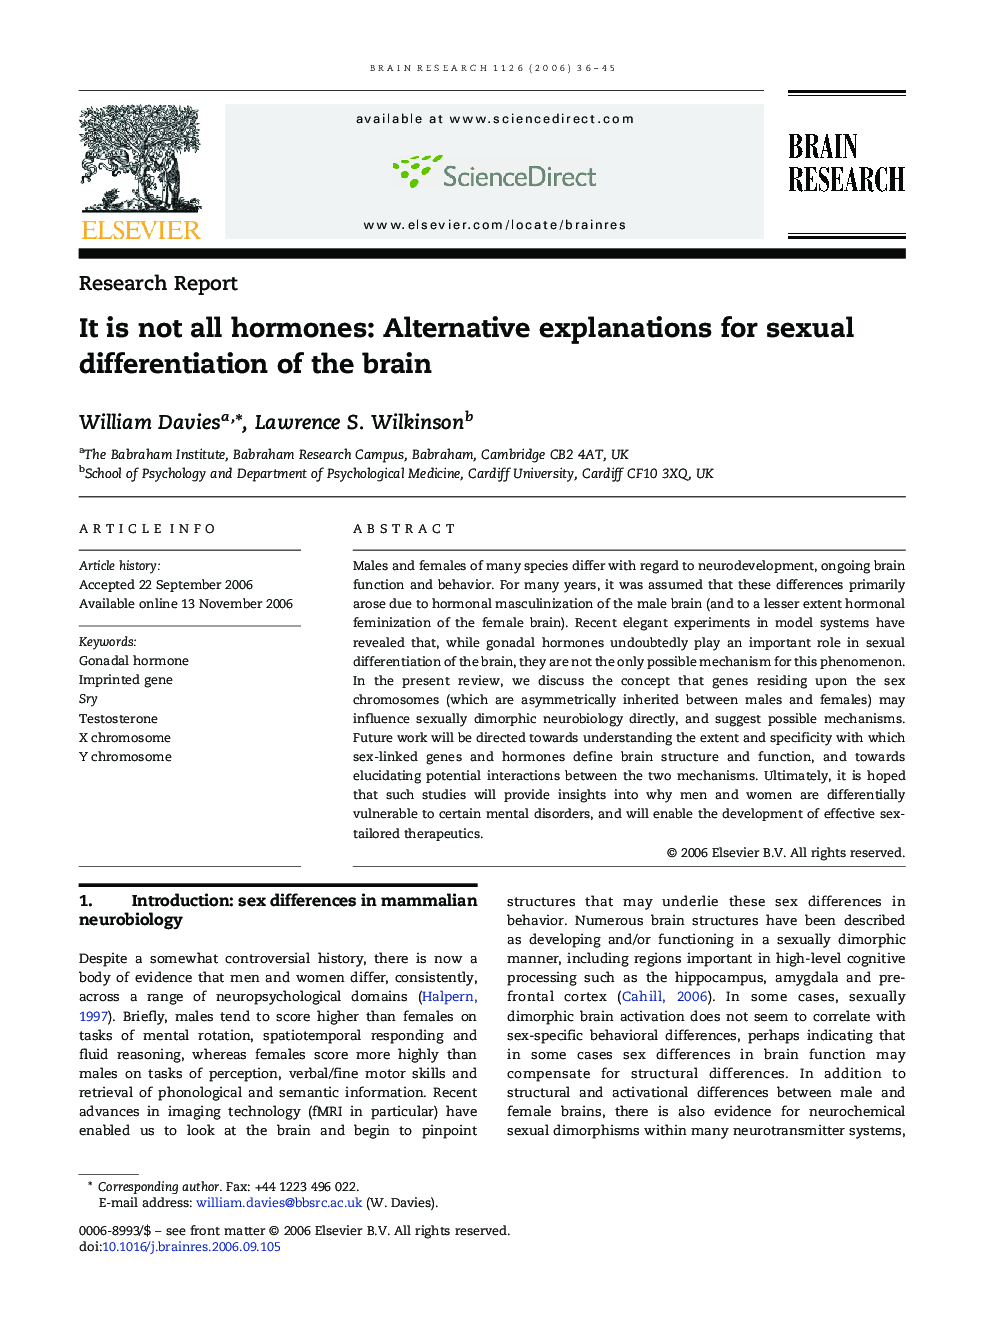 It is not all hormones: Alternative explanations for sexual differentiation of the brain